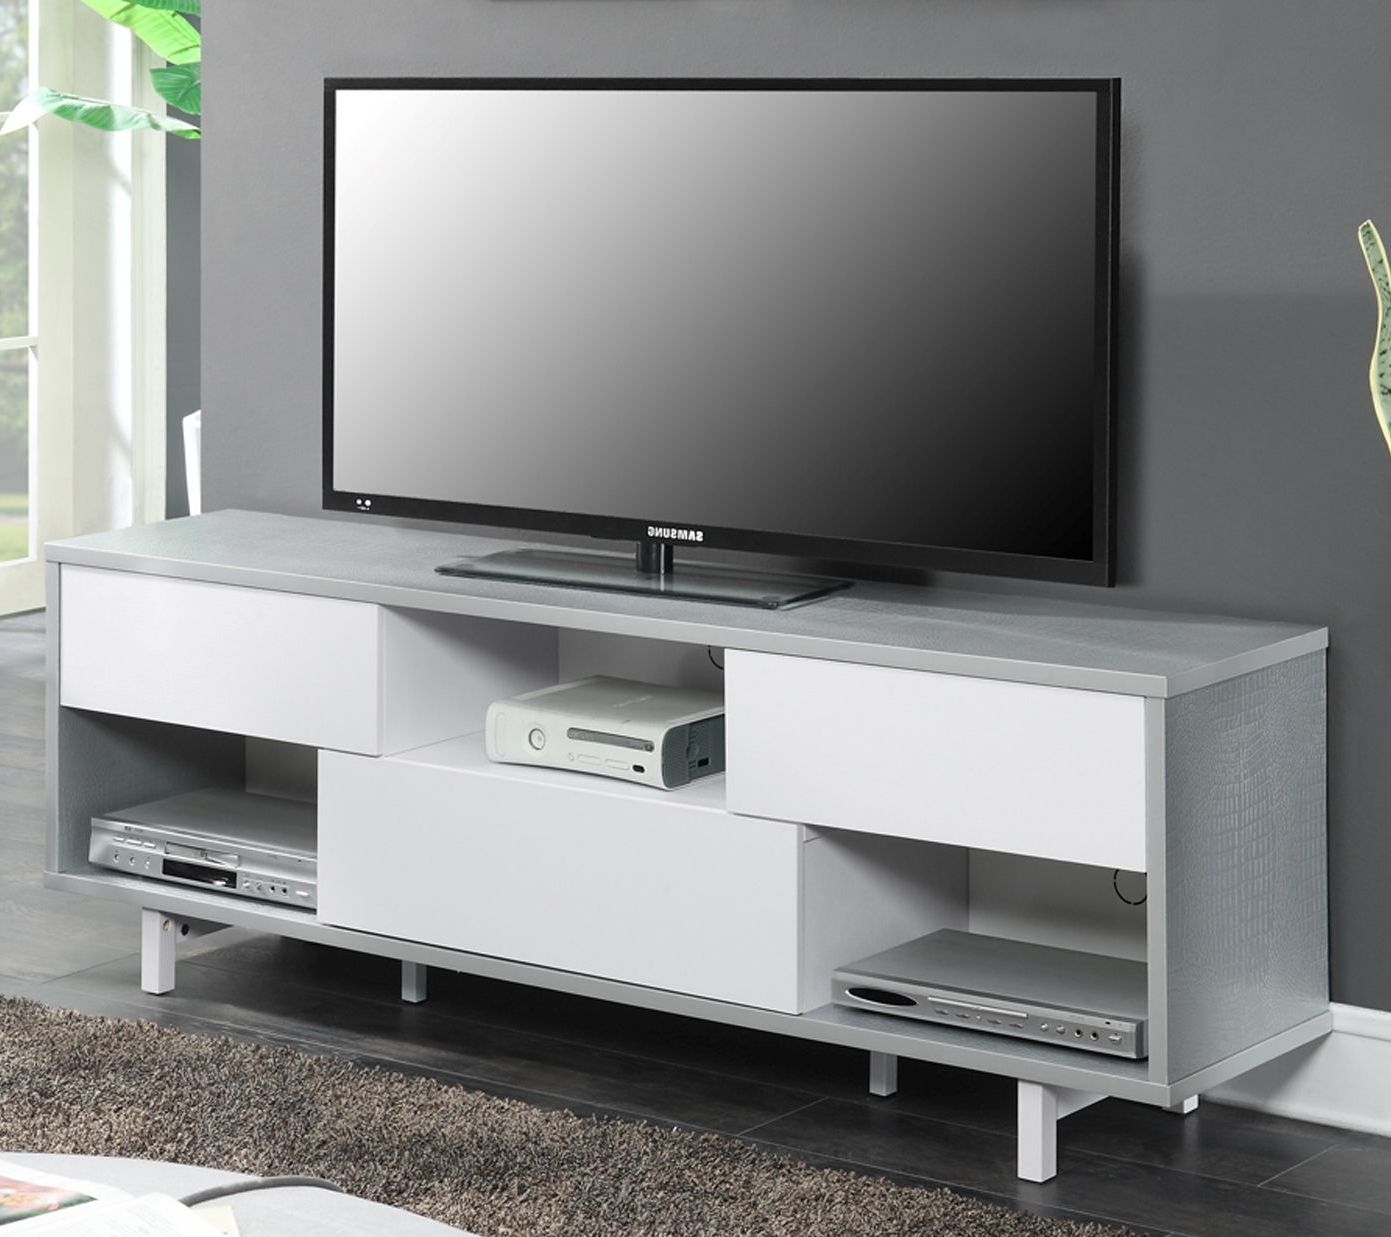 Newport Ventura 60" Tv Stand In Weathered Gray/white /w Pertaining To Convenience Concepts Newport Marbella 60" Tv Stands (Gallery 6 of 20)